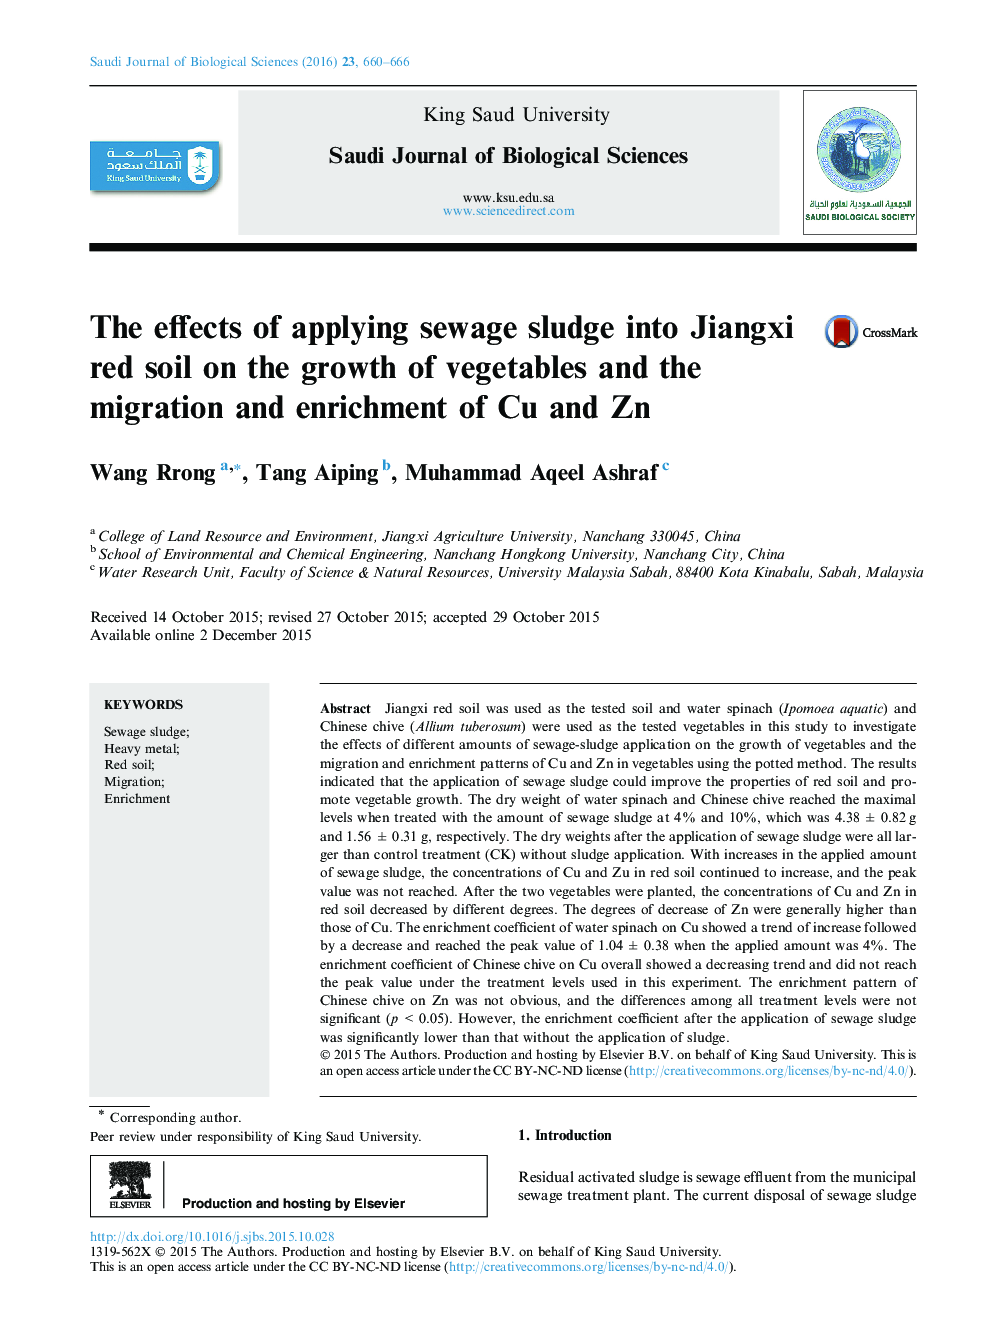 The effects of applying sewage sludge into Jiangxi red soil on the growth of vegetables and the migration and enrichment of Cu and Zn 